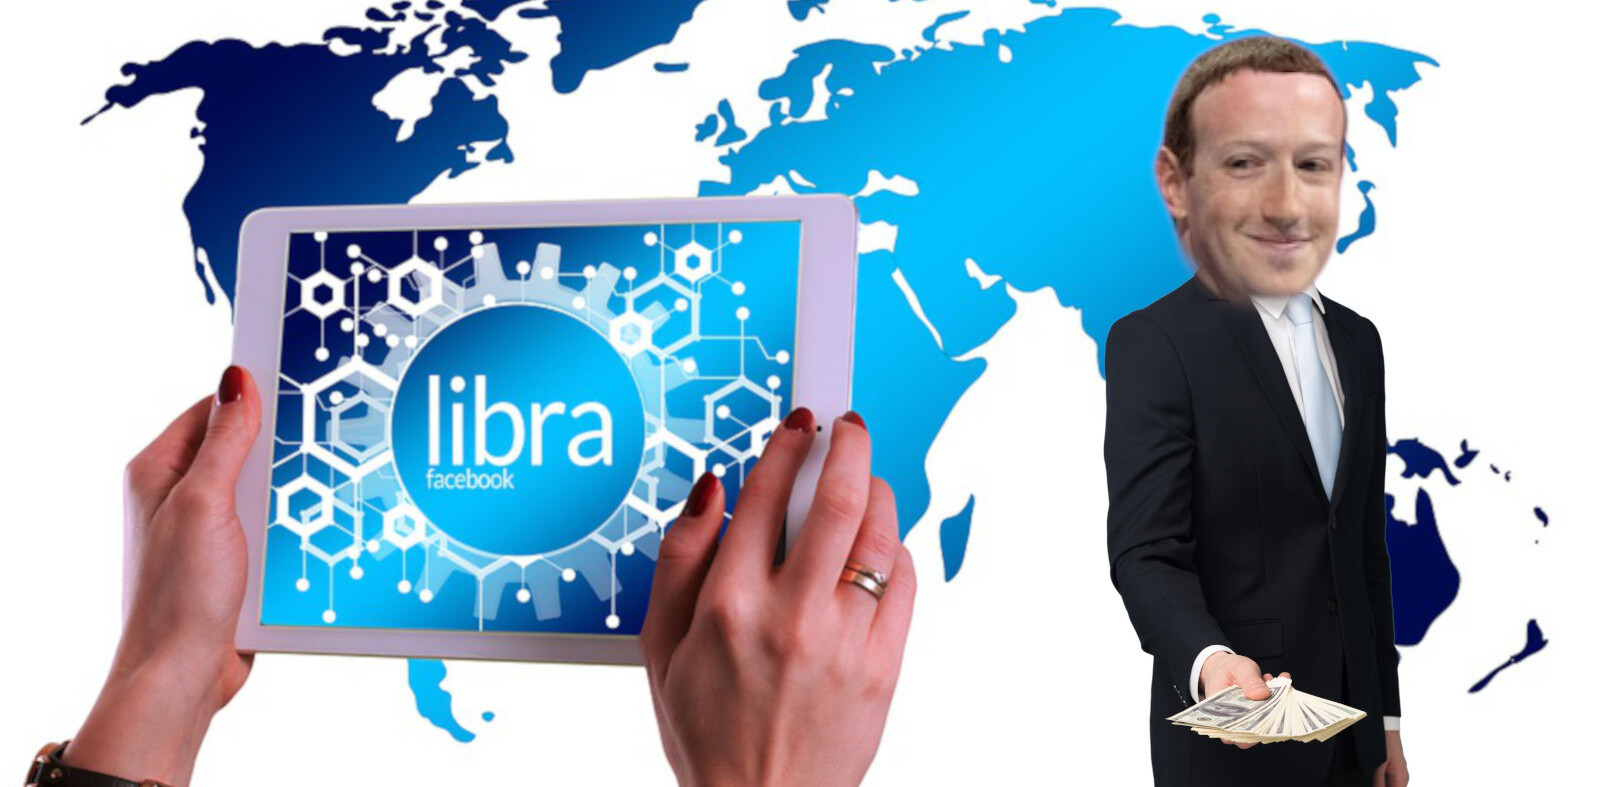 Want to make $10,000 from Libra? Break its blockchain